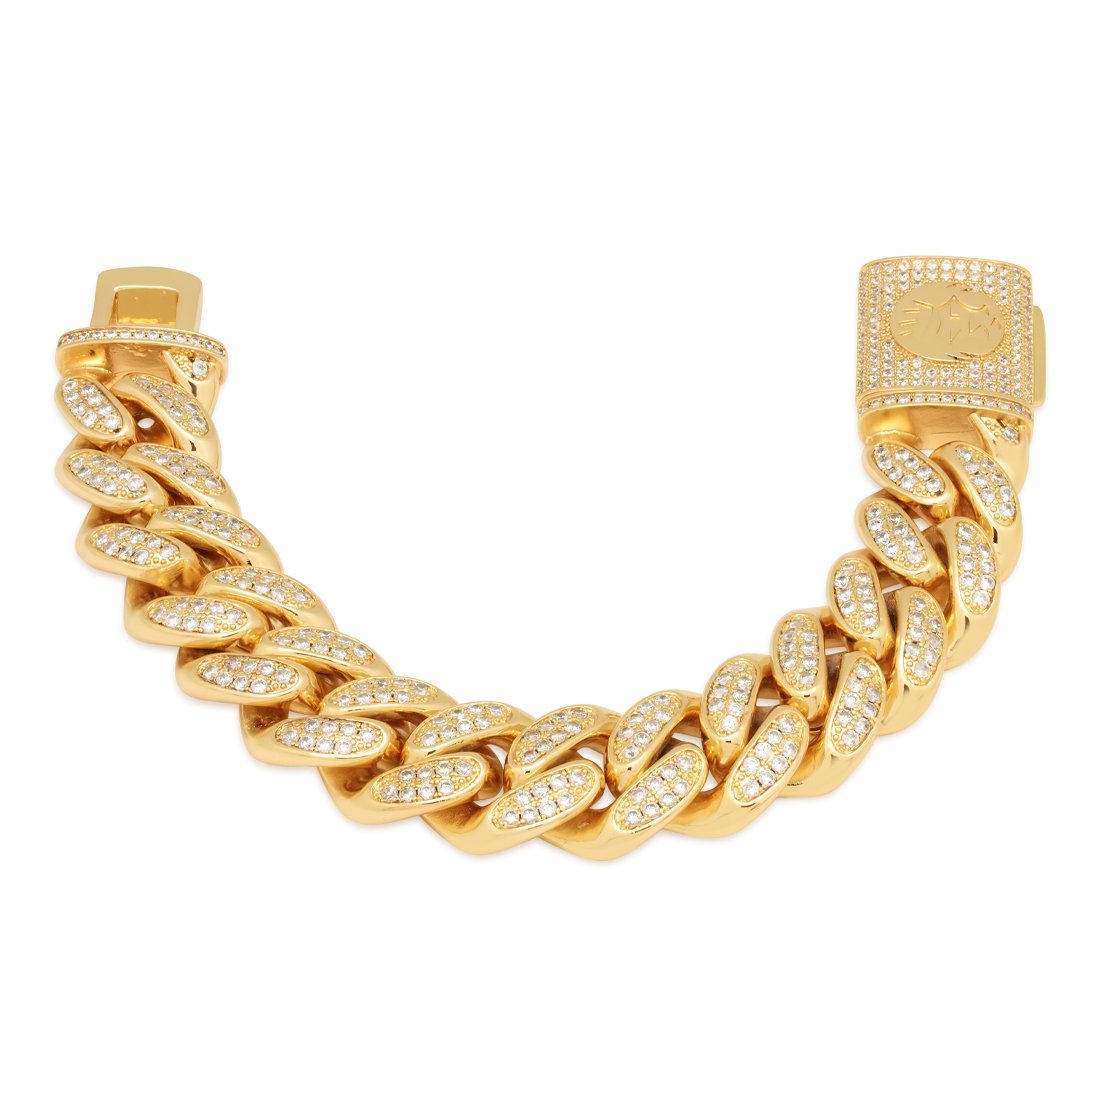 18mm KILO Miami Cuban Chain Bracelet 14k Gold Plated Stainless